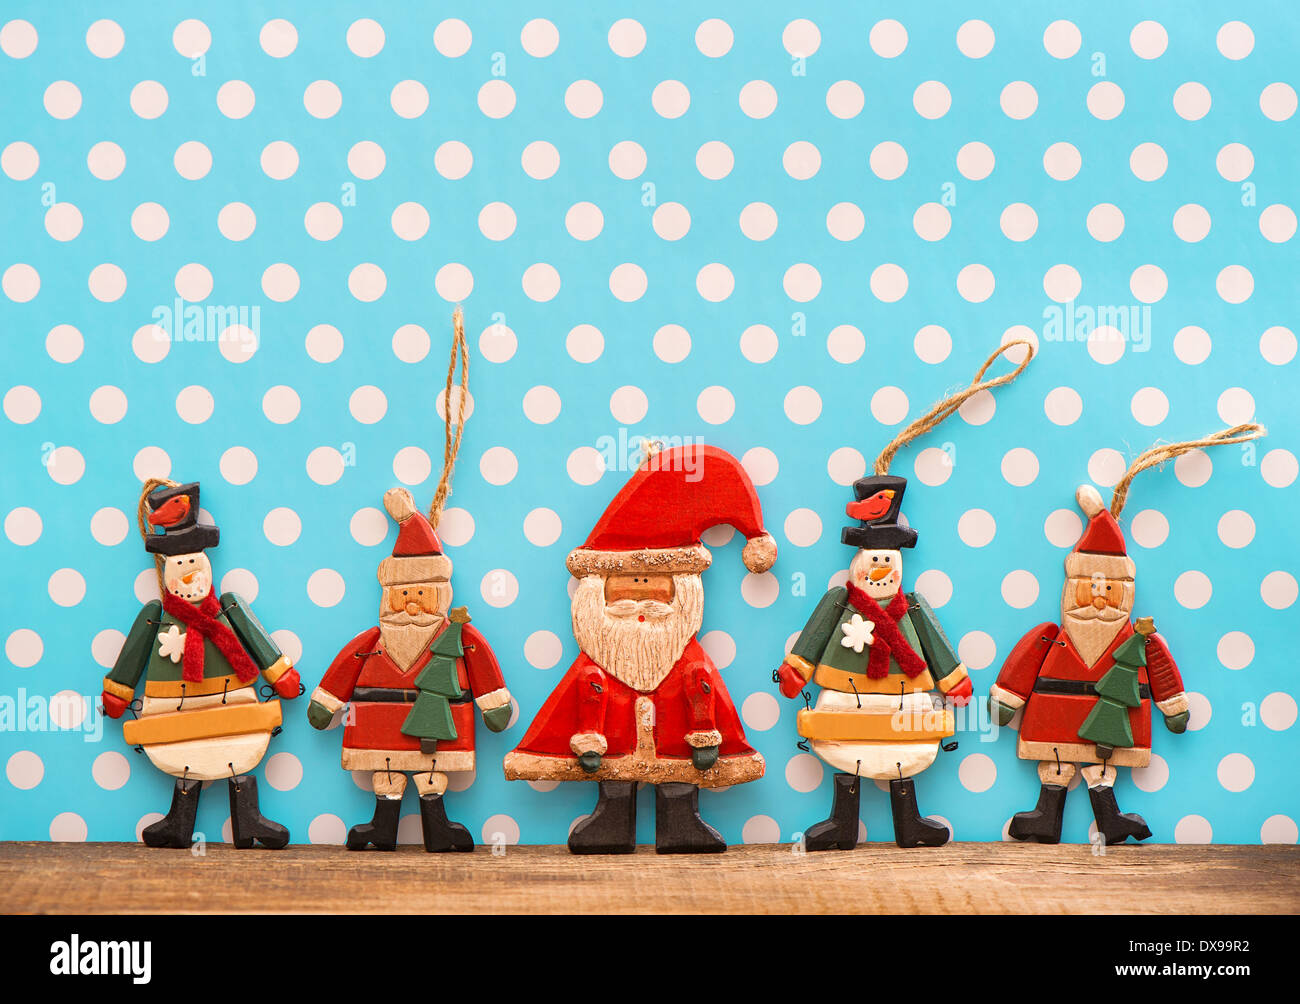 christmas decoration with antique handmade wooden toys. sentimental nostalgic retro style picture Stock Photo